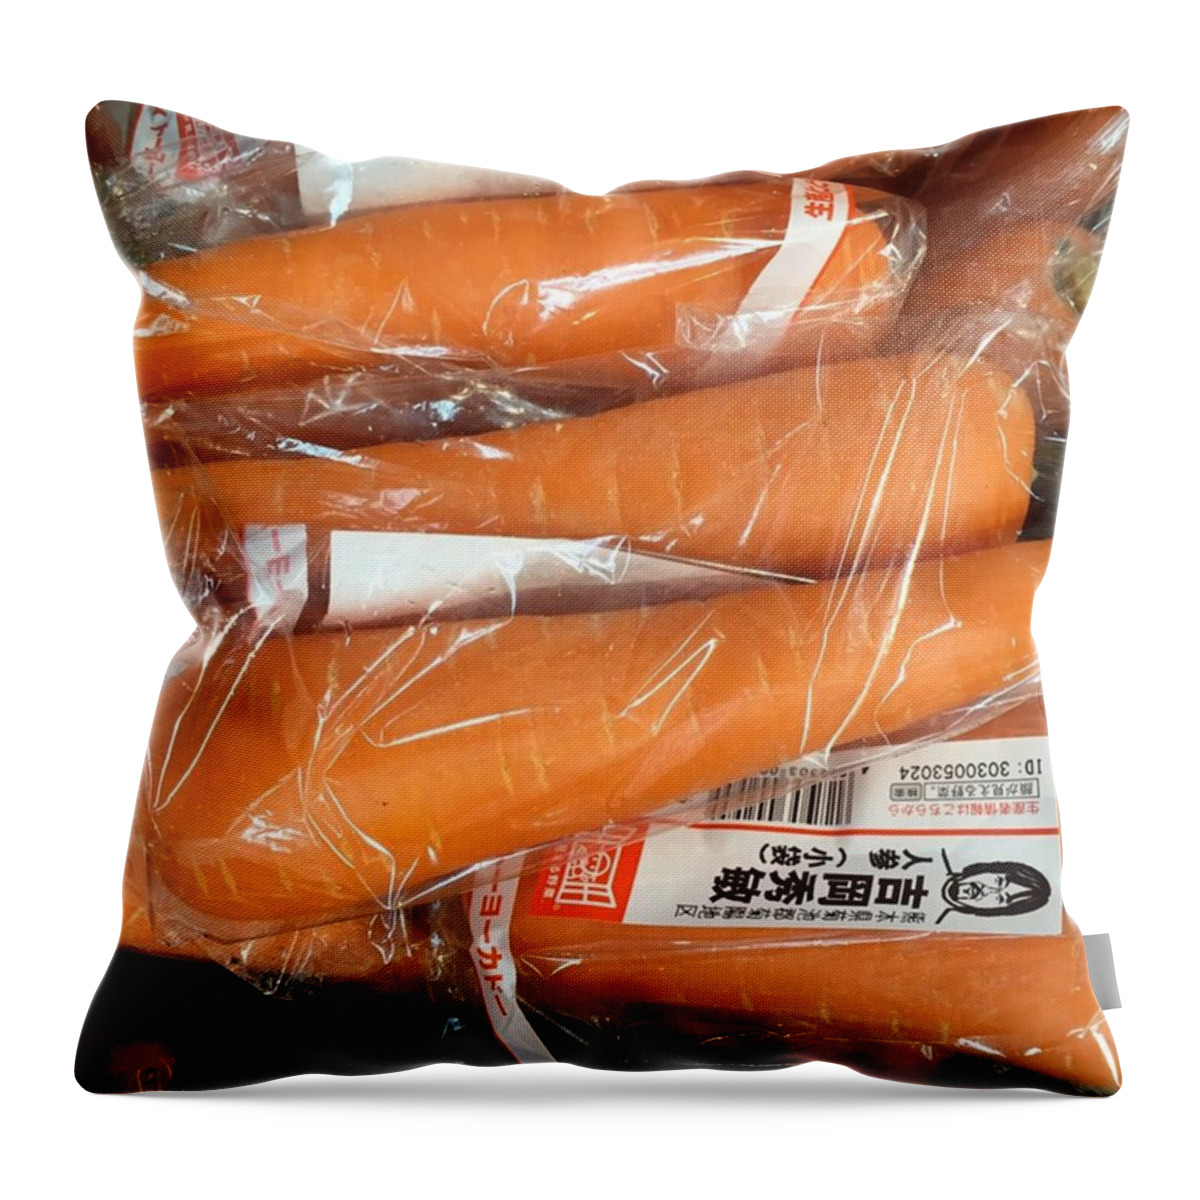 Japan Throw Pillow featuring the photograph Perfect Produce by Nancy Ingersoll